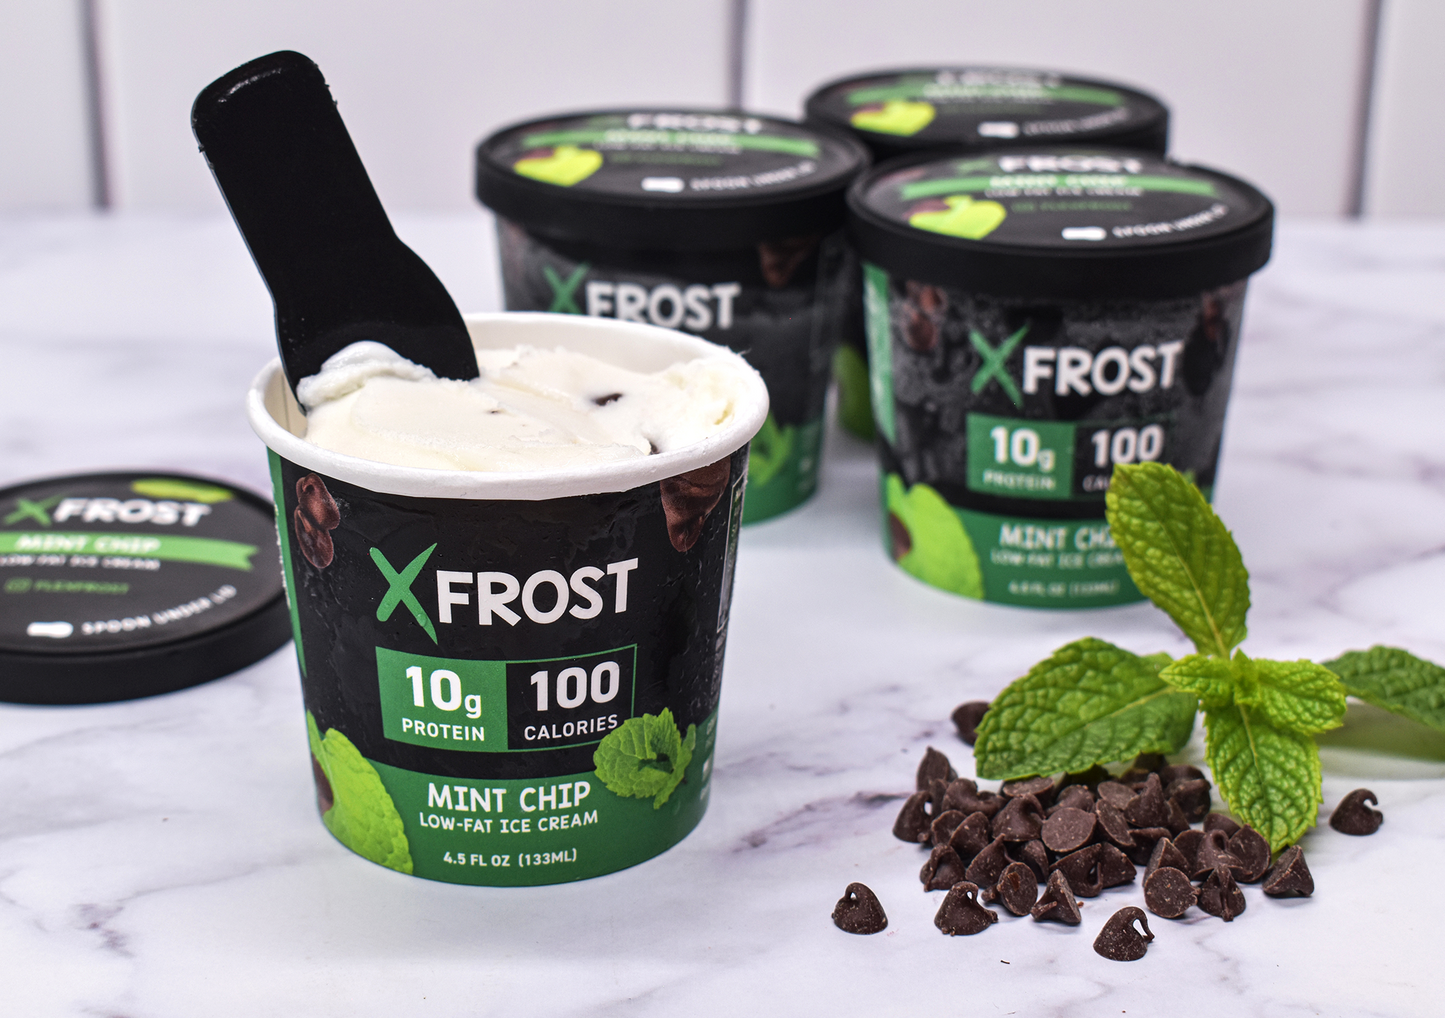 Xfrost - Protein Ice Cream – Pursuit - Xfrost Pickup